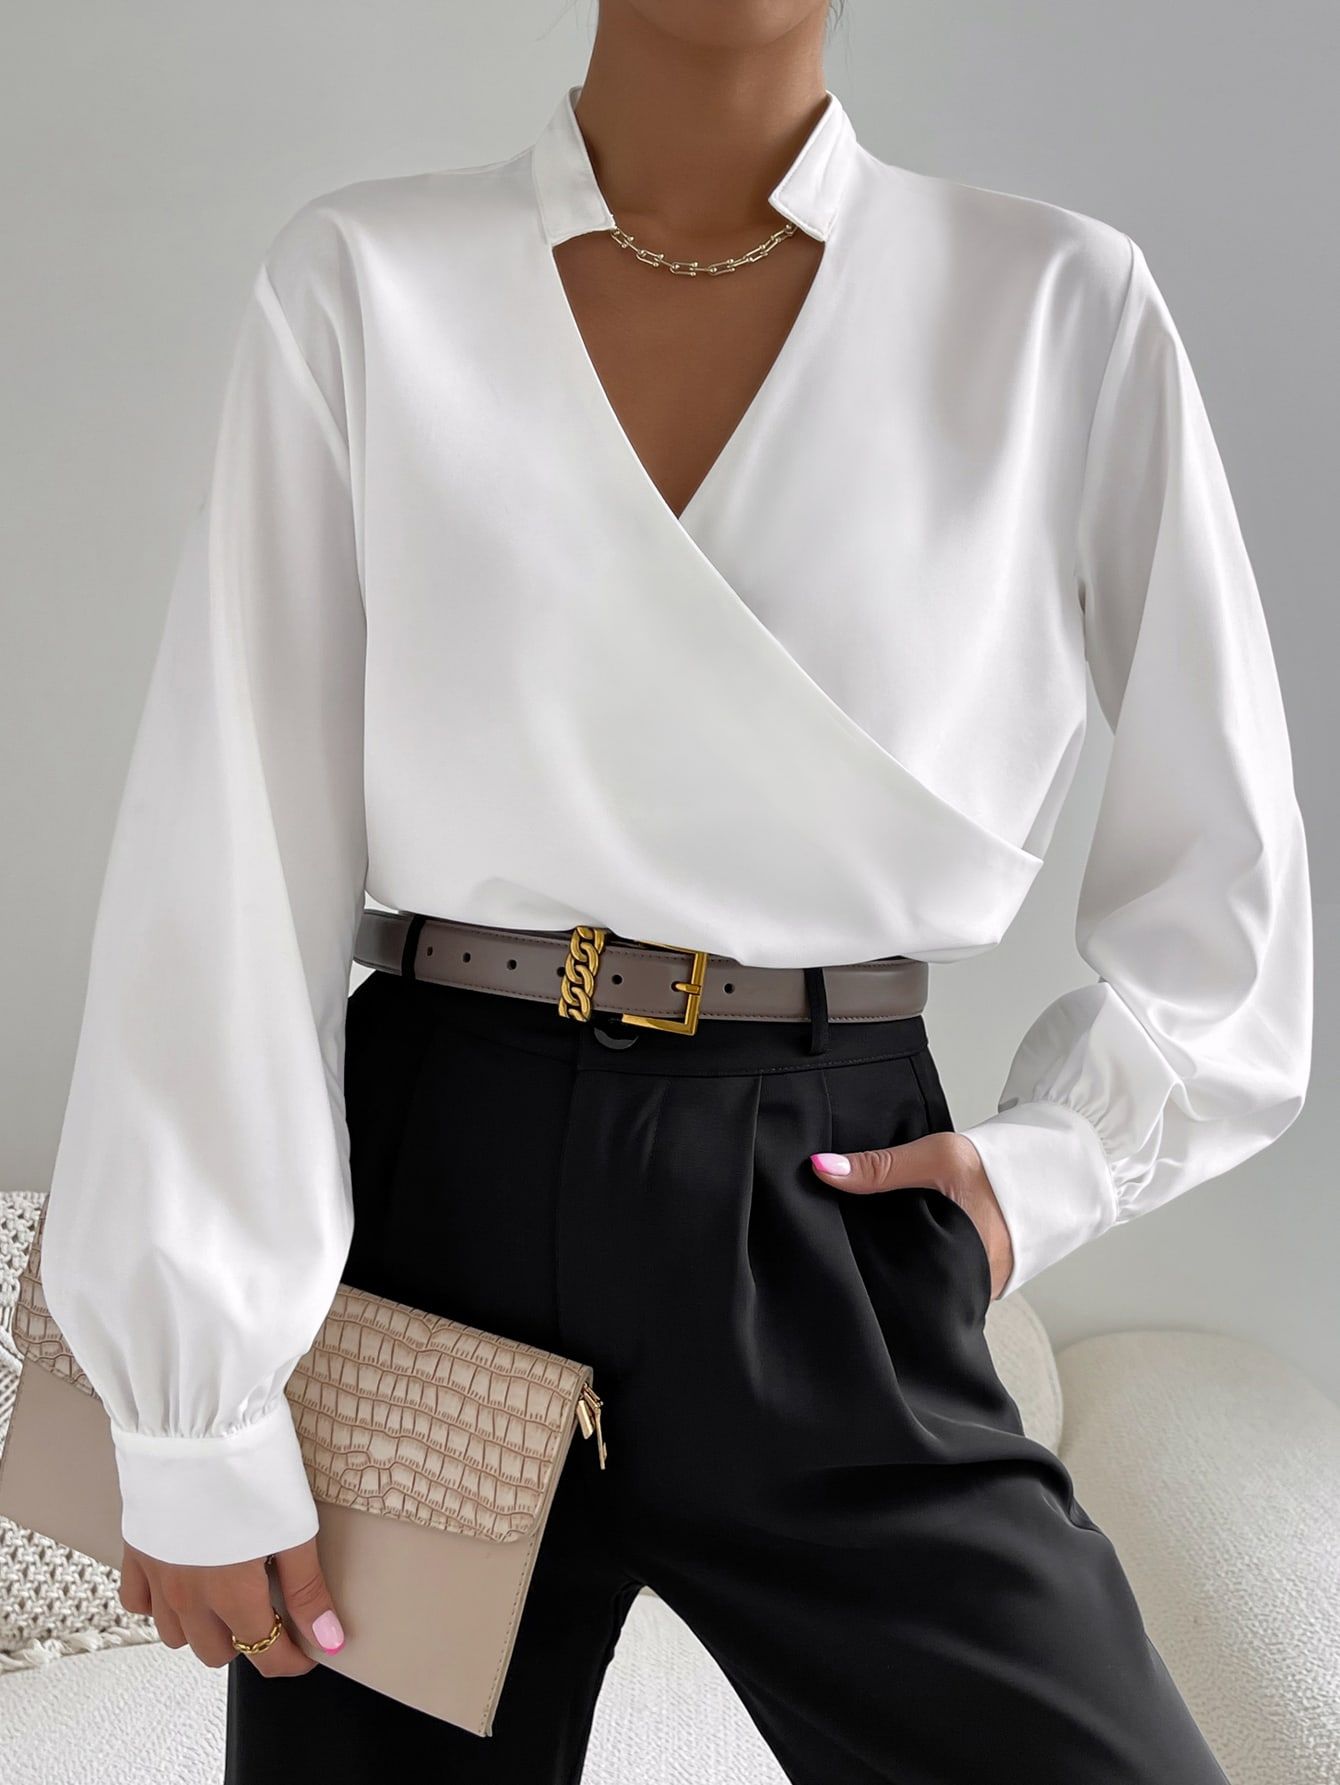 How to Style Long Blouse: 15 Ladylike & Breezy Outfit Ideas